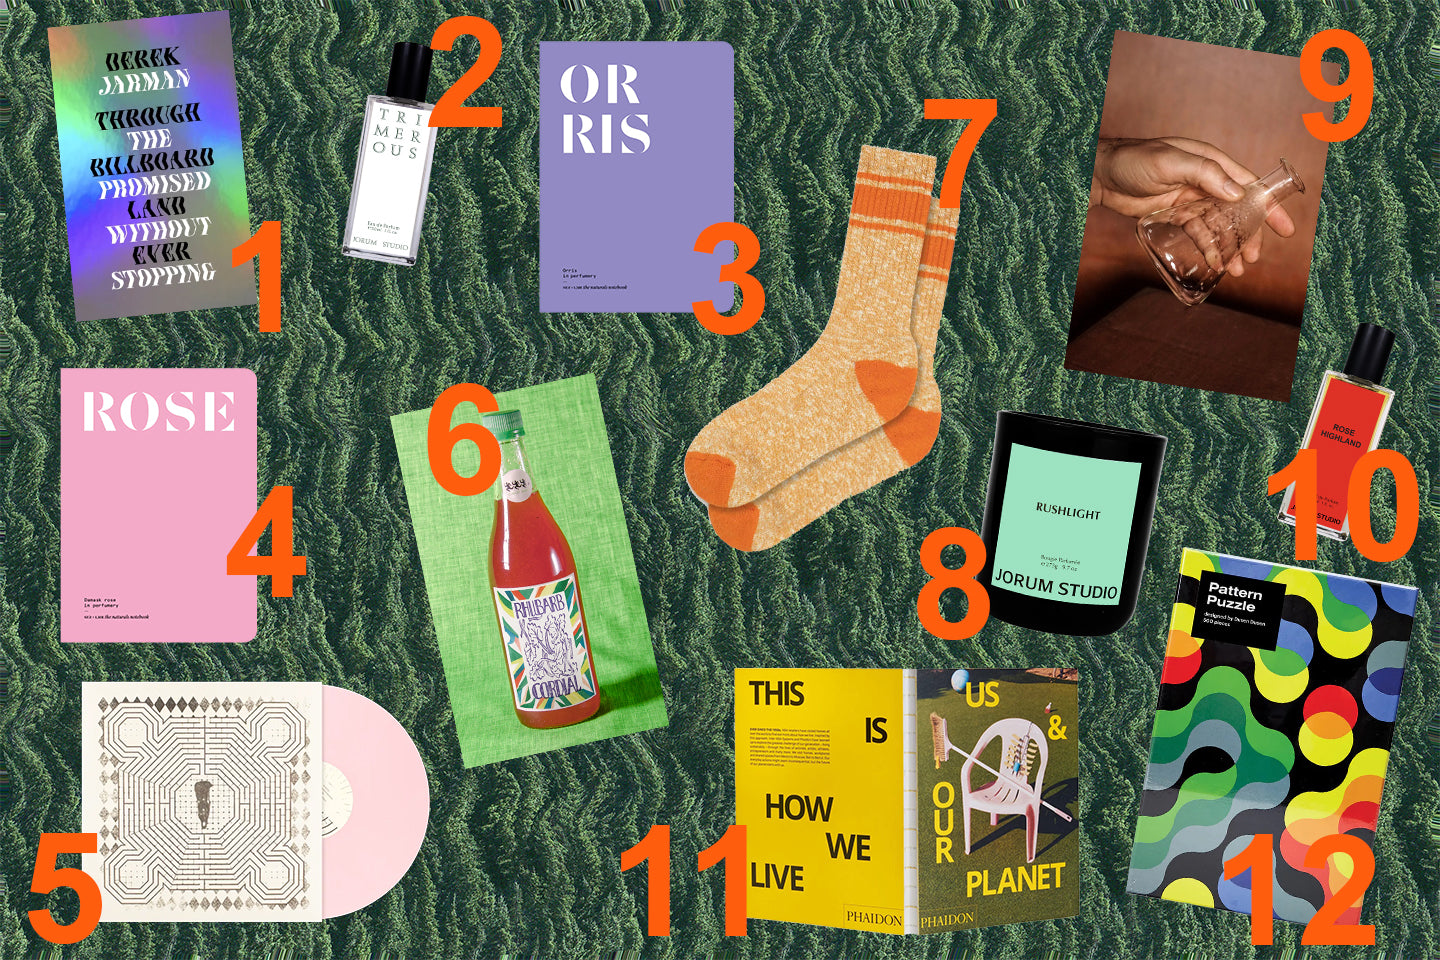 Jorum Studio Gift Guide 2023 featuring gifts arranged on a background of distorted green trees